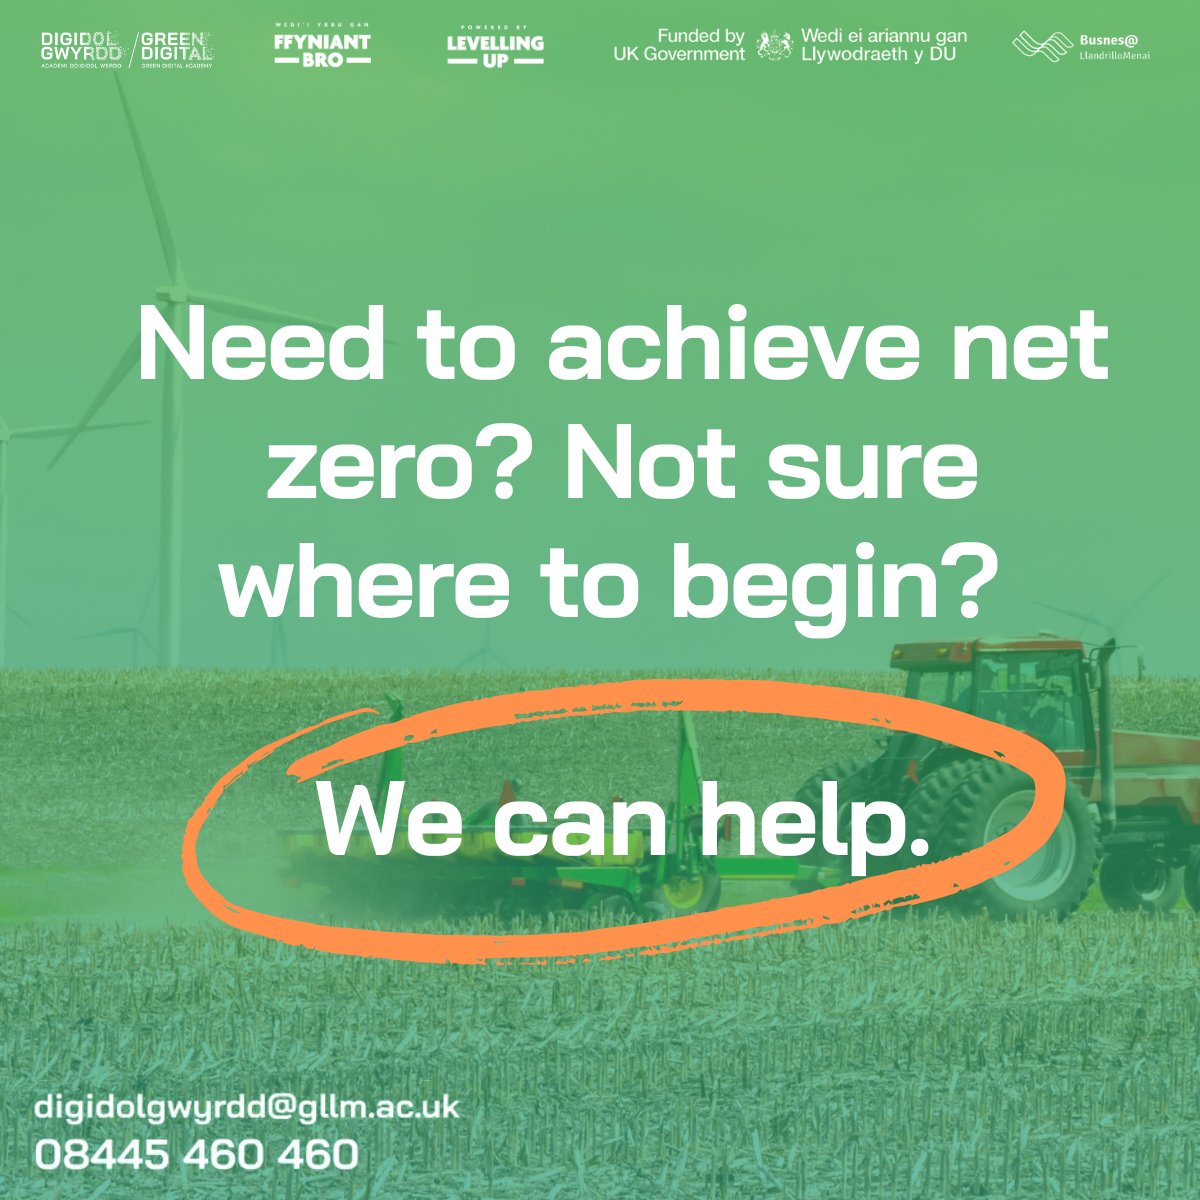 Running a business is already challenging, that's without considering net-zero requirements. That's where we can help! We support your business in achieving these targets without compromising your business. For more: ow.ly/iXsP50R288x #LevellingUp #FundedbyUKGovernment